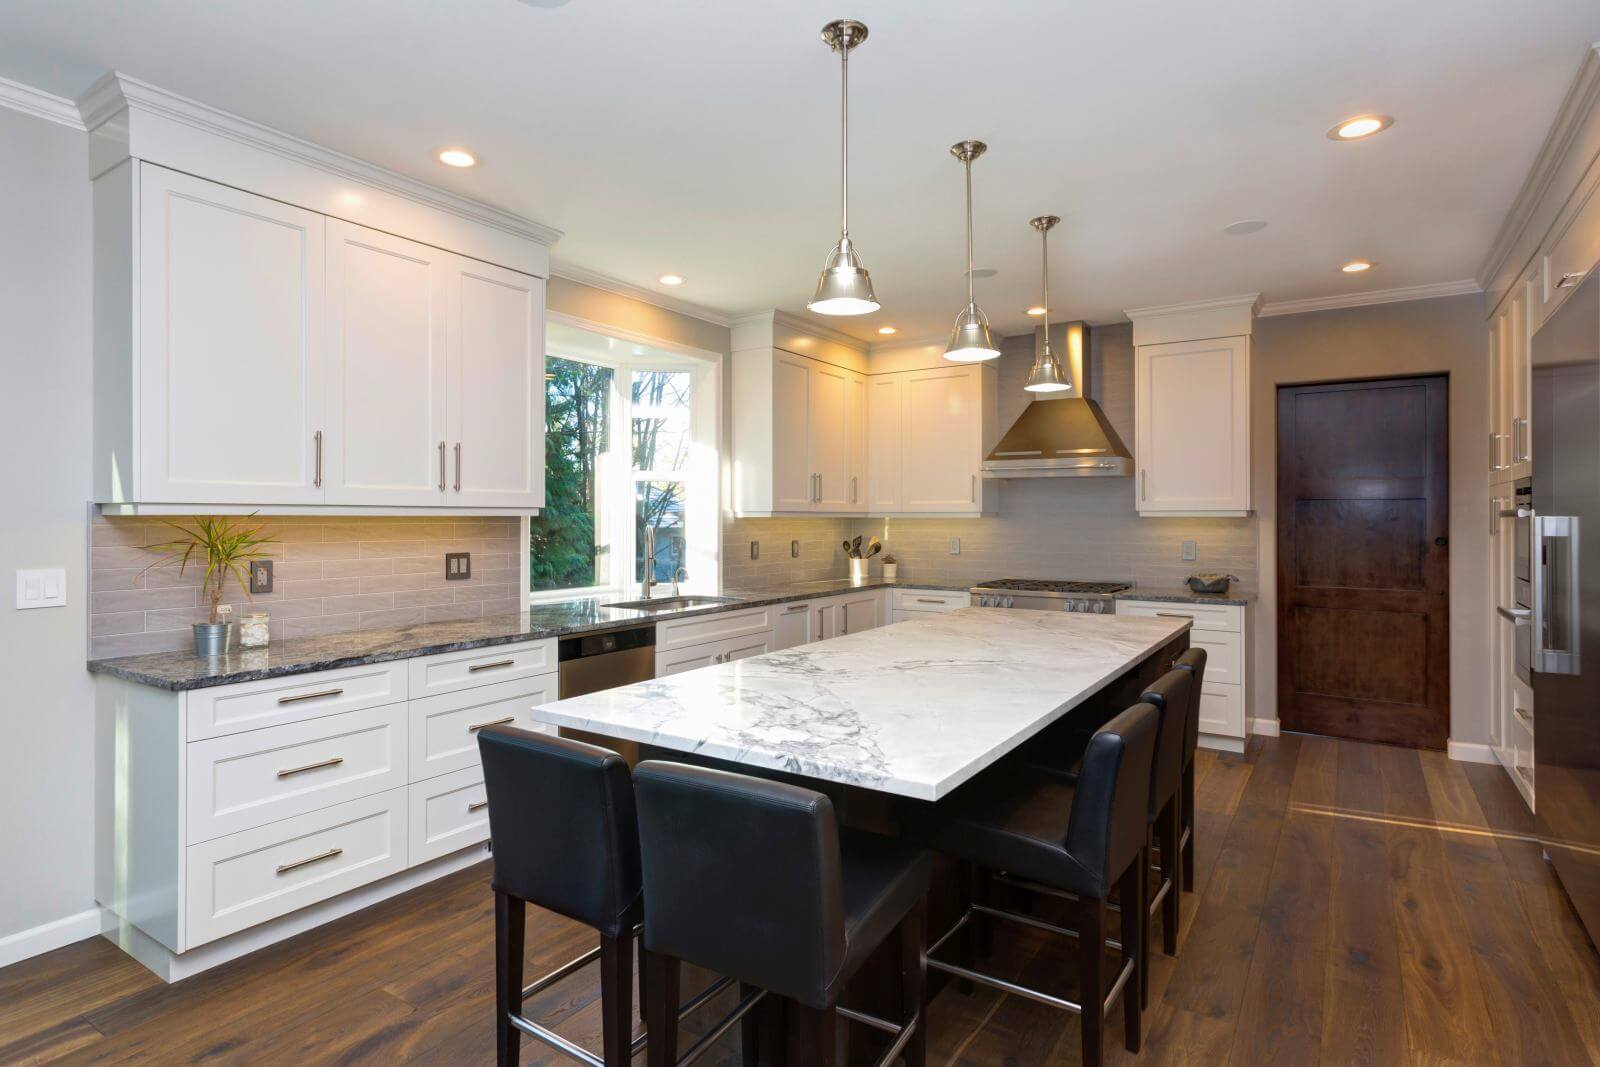 Luxury home interior boasts Beautiful black and white kitchen with custom white shaker cabinets, endless marble topped kitchen island with black leather stools over wide planked hardwood floor.